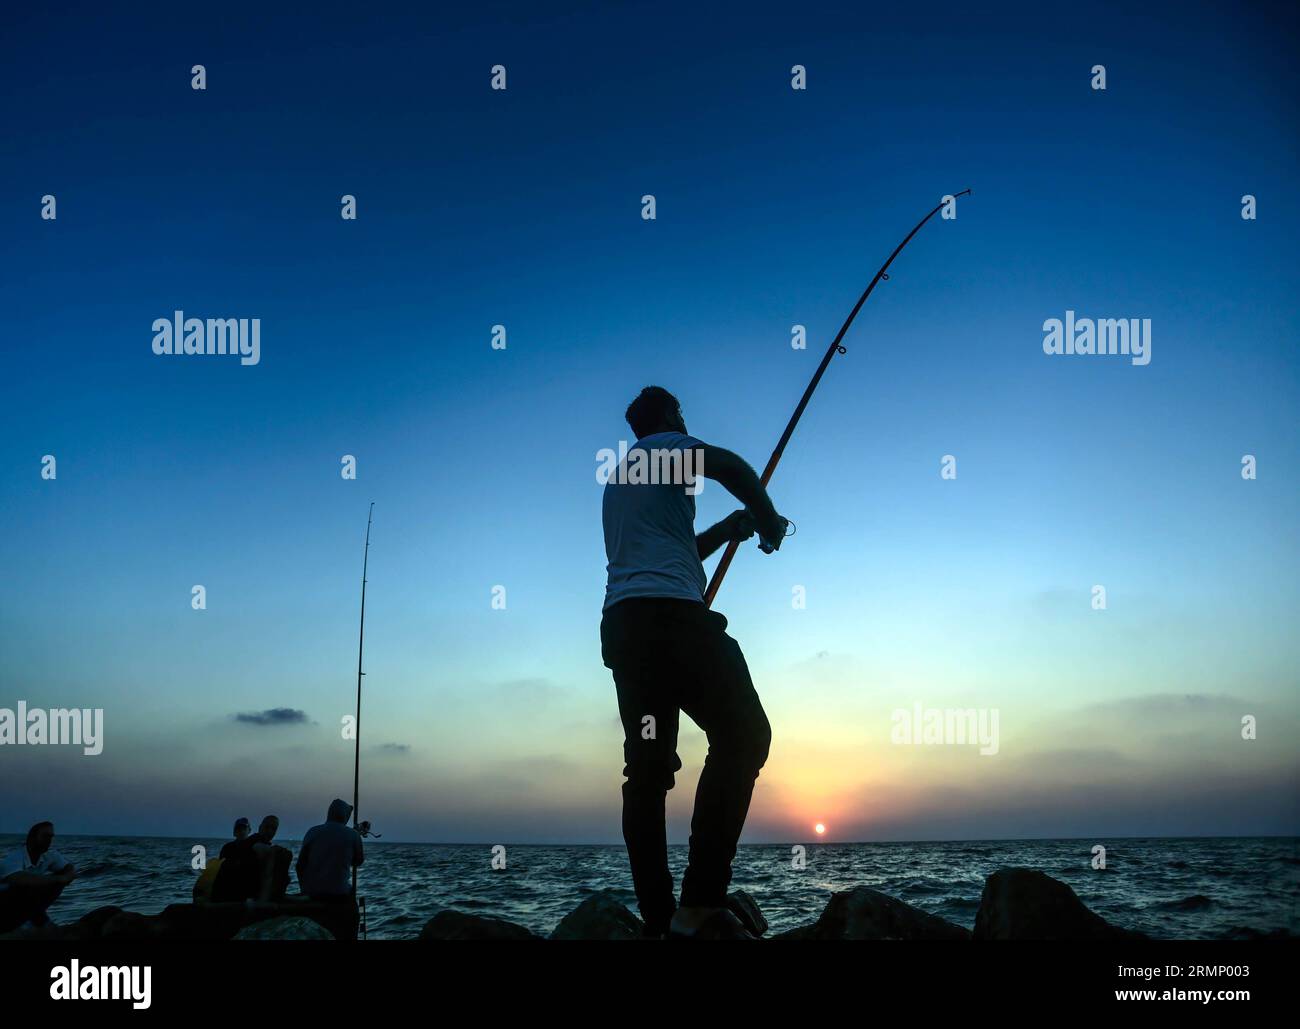 https://c8.alamy.com/comp/2RMP003/gaza-city-palestine-28th-aug-2023-palestinian-men-use-fishing-rods-to-catch-fish-during-sunset-on-the-seashore-in-the-northern-gaza-strip-photo-by-mahmoud-issasopa-imagessipa-usa-credit-sipa-usaalamy-live-news-2RMP003.jpg